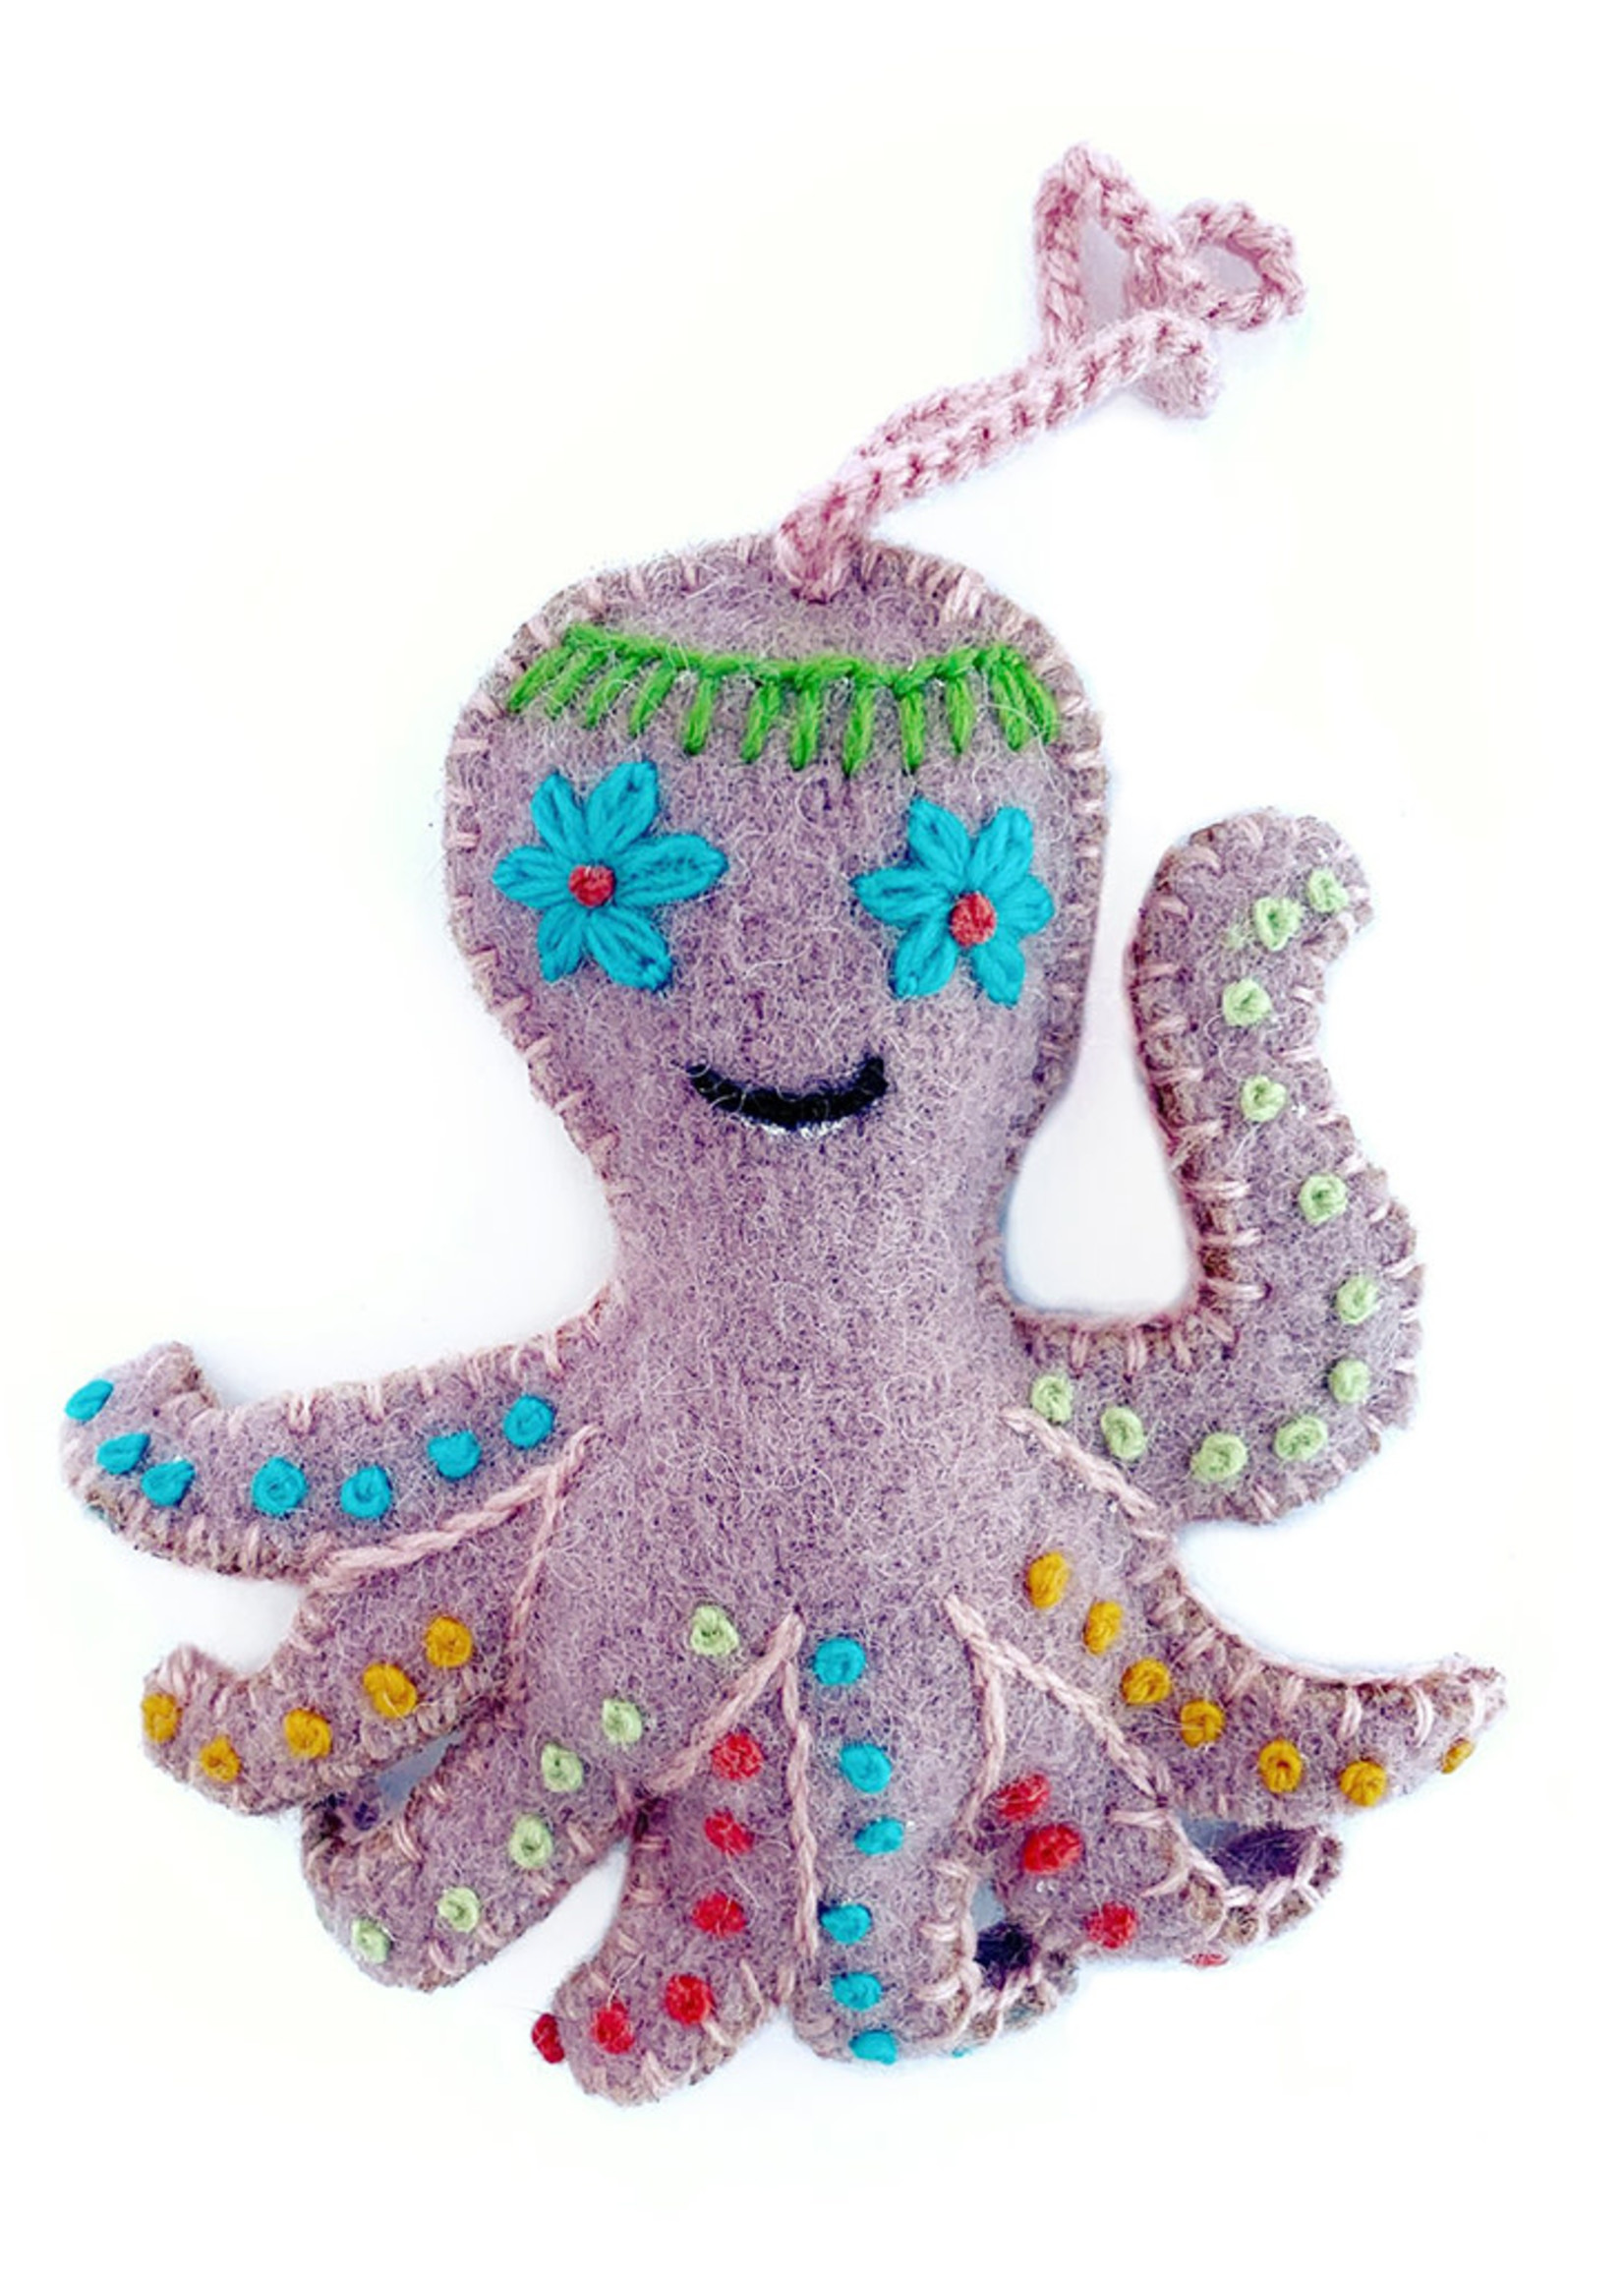 Ornaments 4 Orphans Wool Octopus Embroidered Ornament